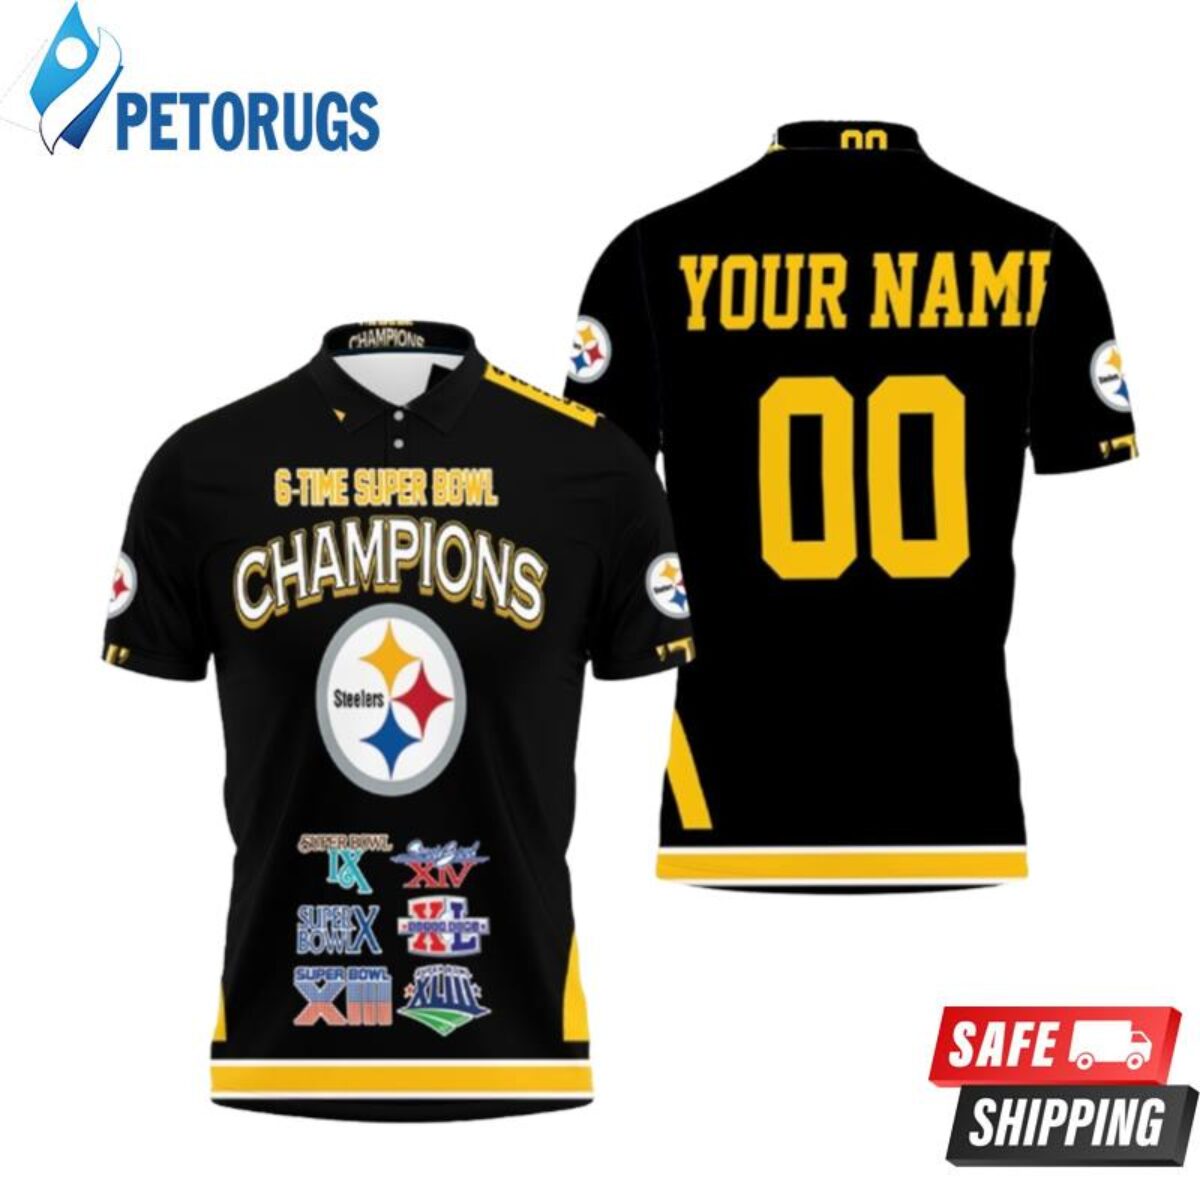 Pittsburgh Steelers 6-time Super Bowl Champions For Fans Personalized Polo  Shirts - Peto Rugs